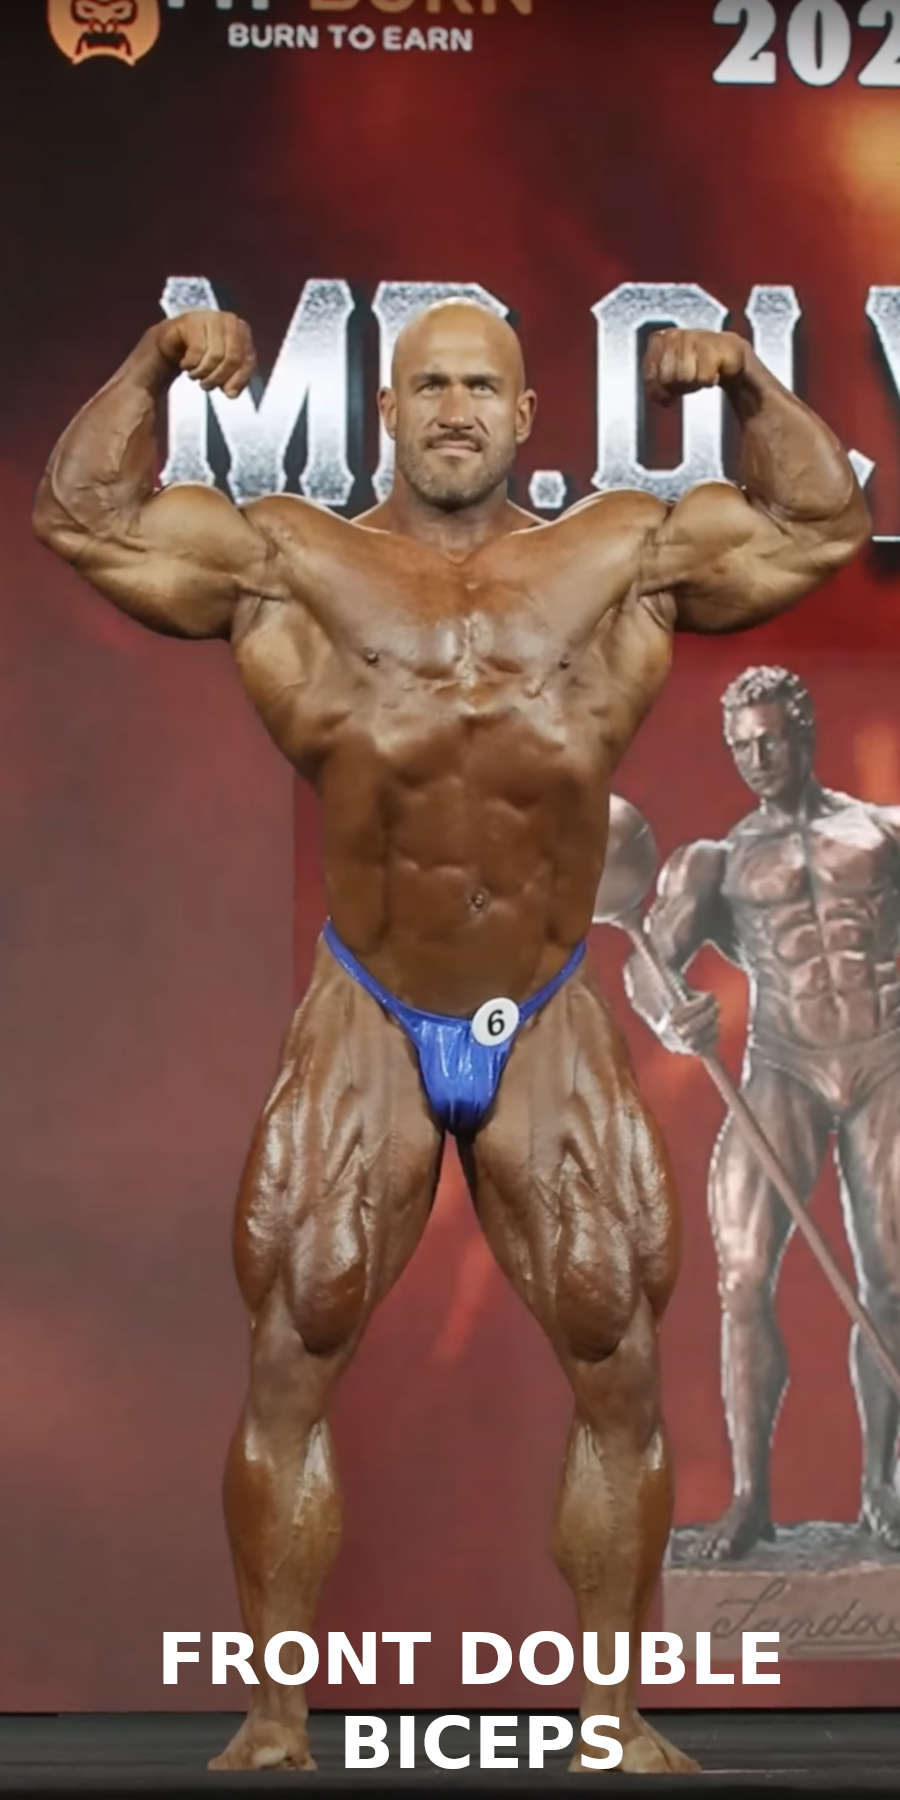 A bodybuilder performing the front double biceps pose on stage during a bodybuilding competition 